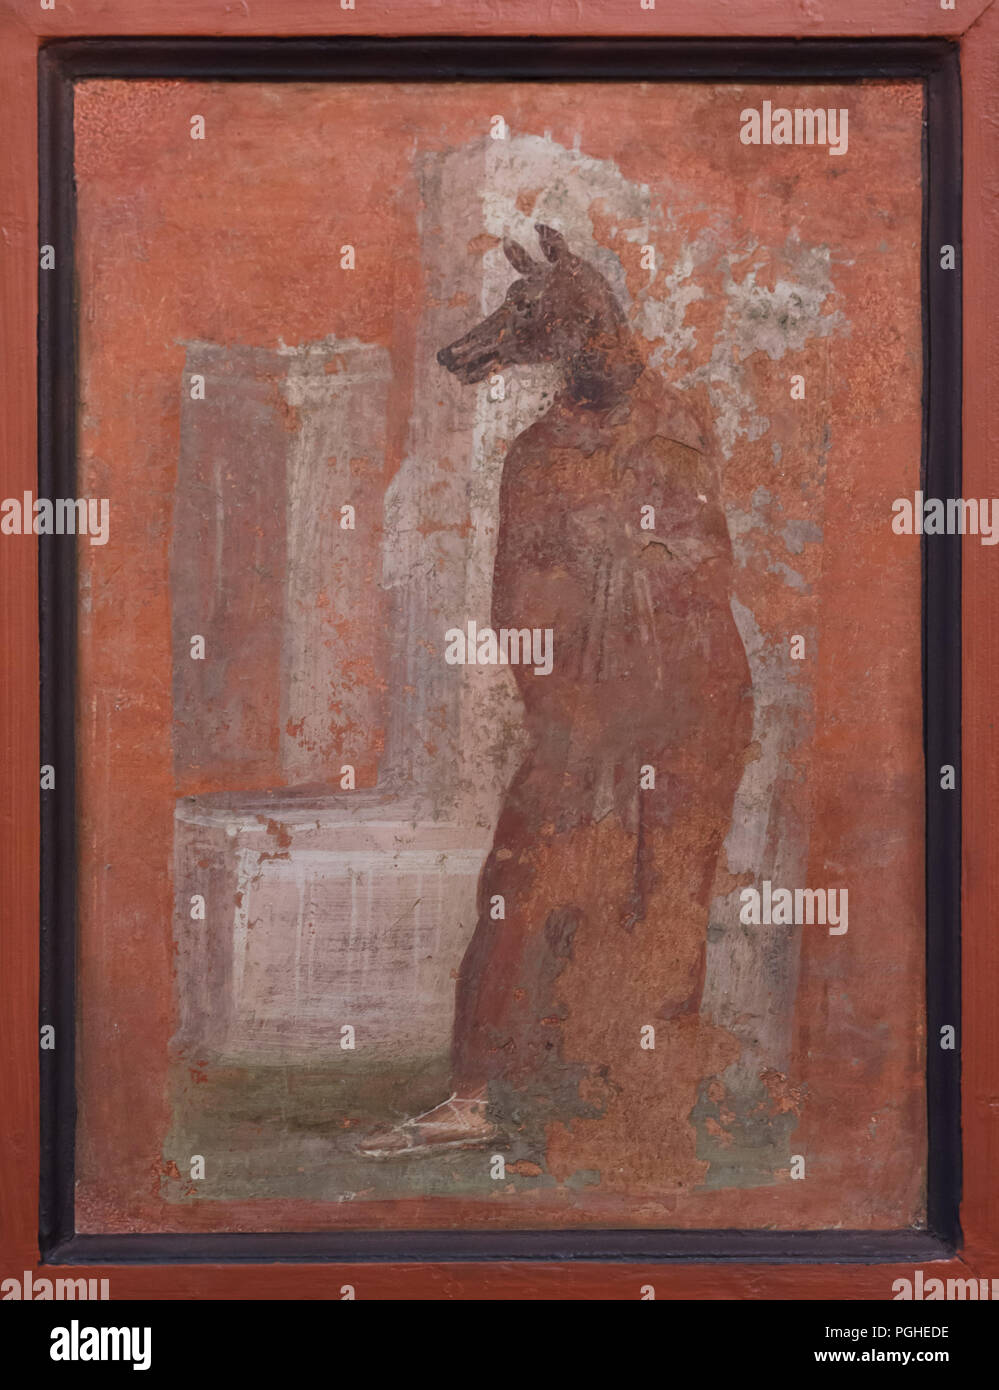 Priestess wears the Anubis mask depicted in the Roman fresco from the ekklesiasterion of the Temple of Isis (Tempio di Iside) in Pompeii, now on display in the National Archaeological Museum (Museo Archeologico Nazionale di Napoli) in Naples, Campania, Italy. Stock Photo